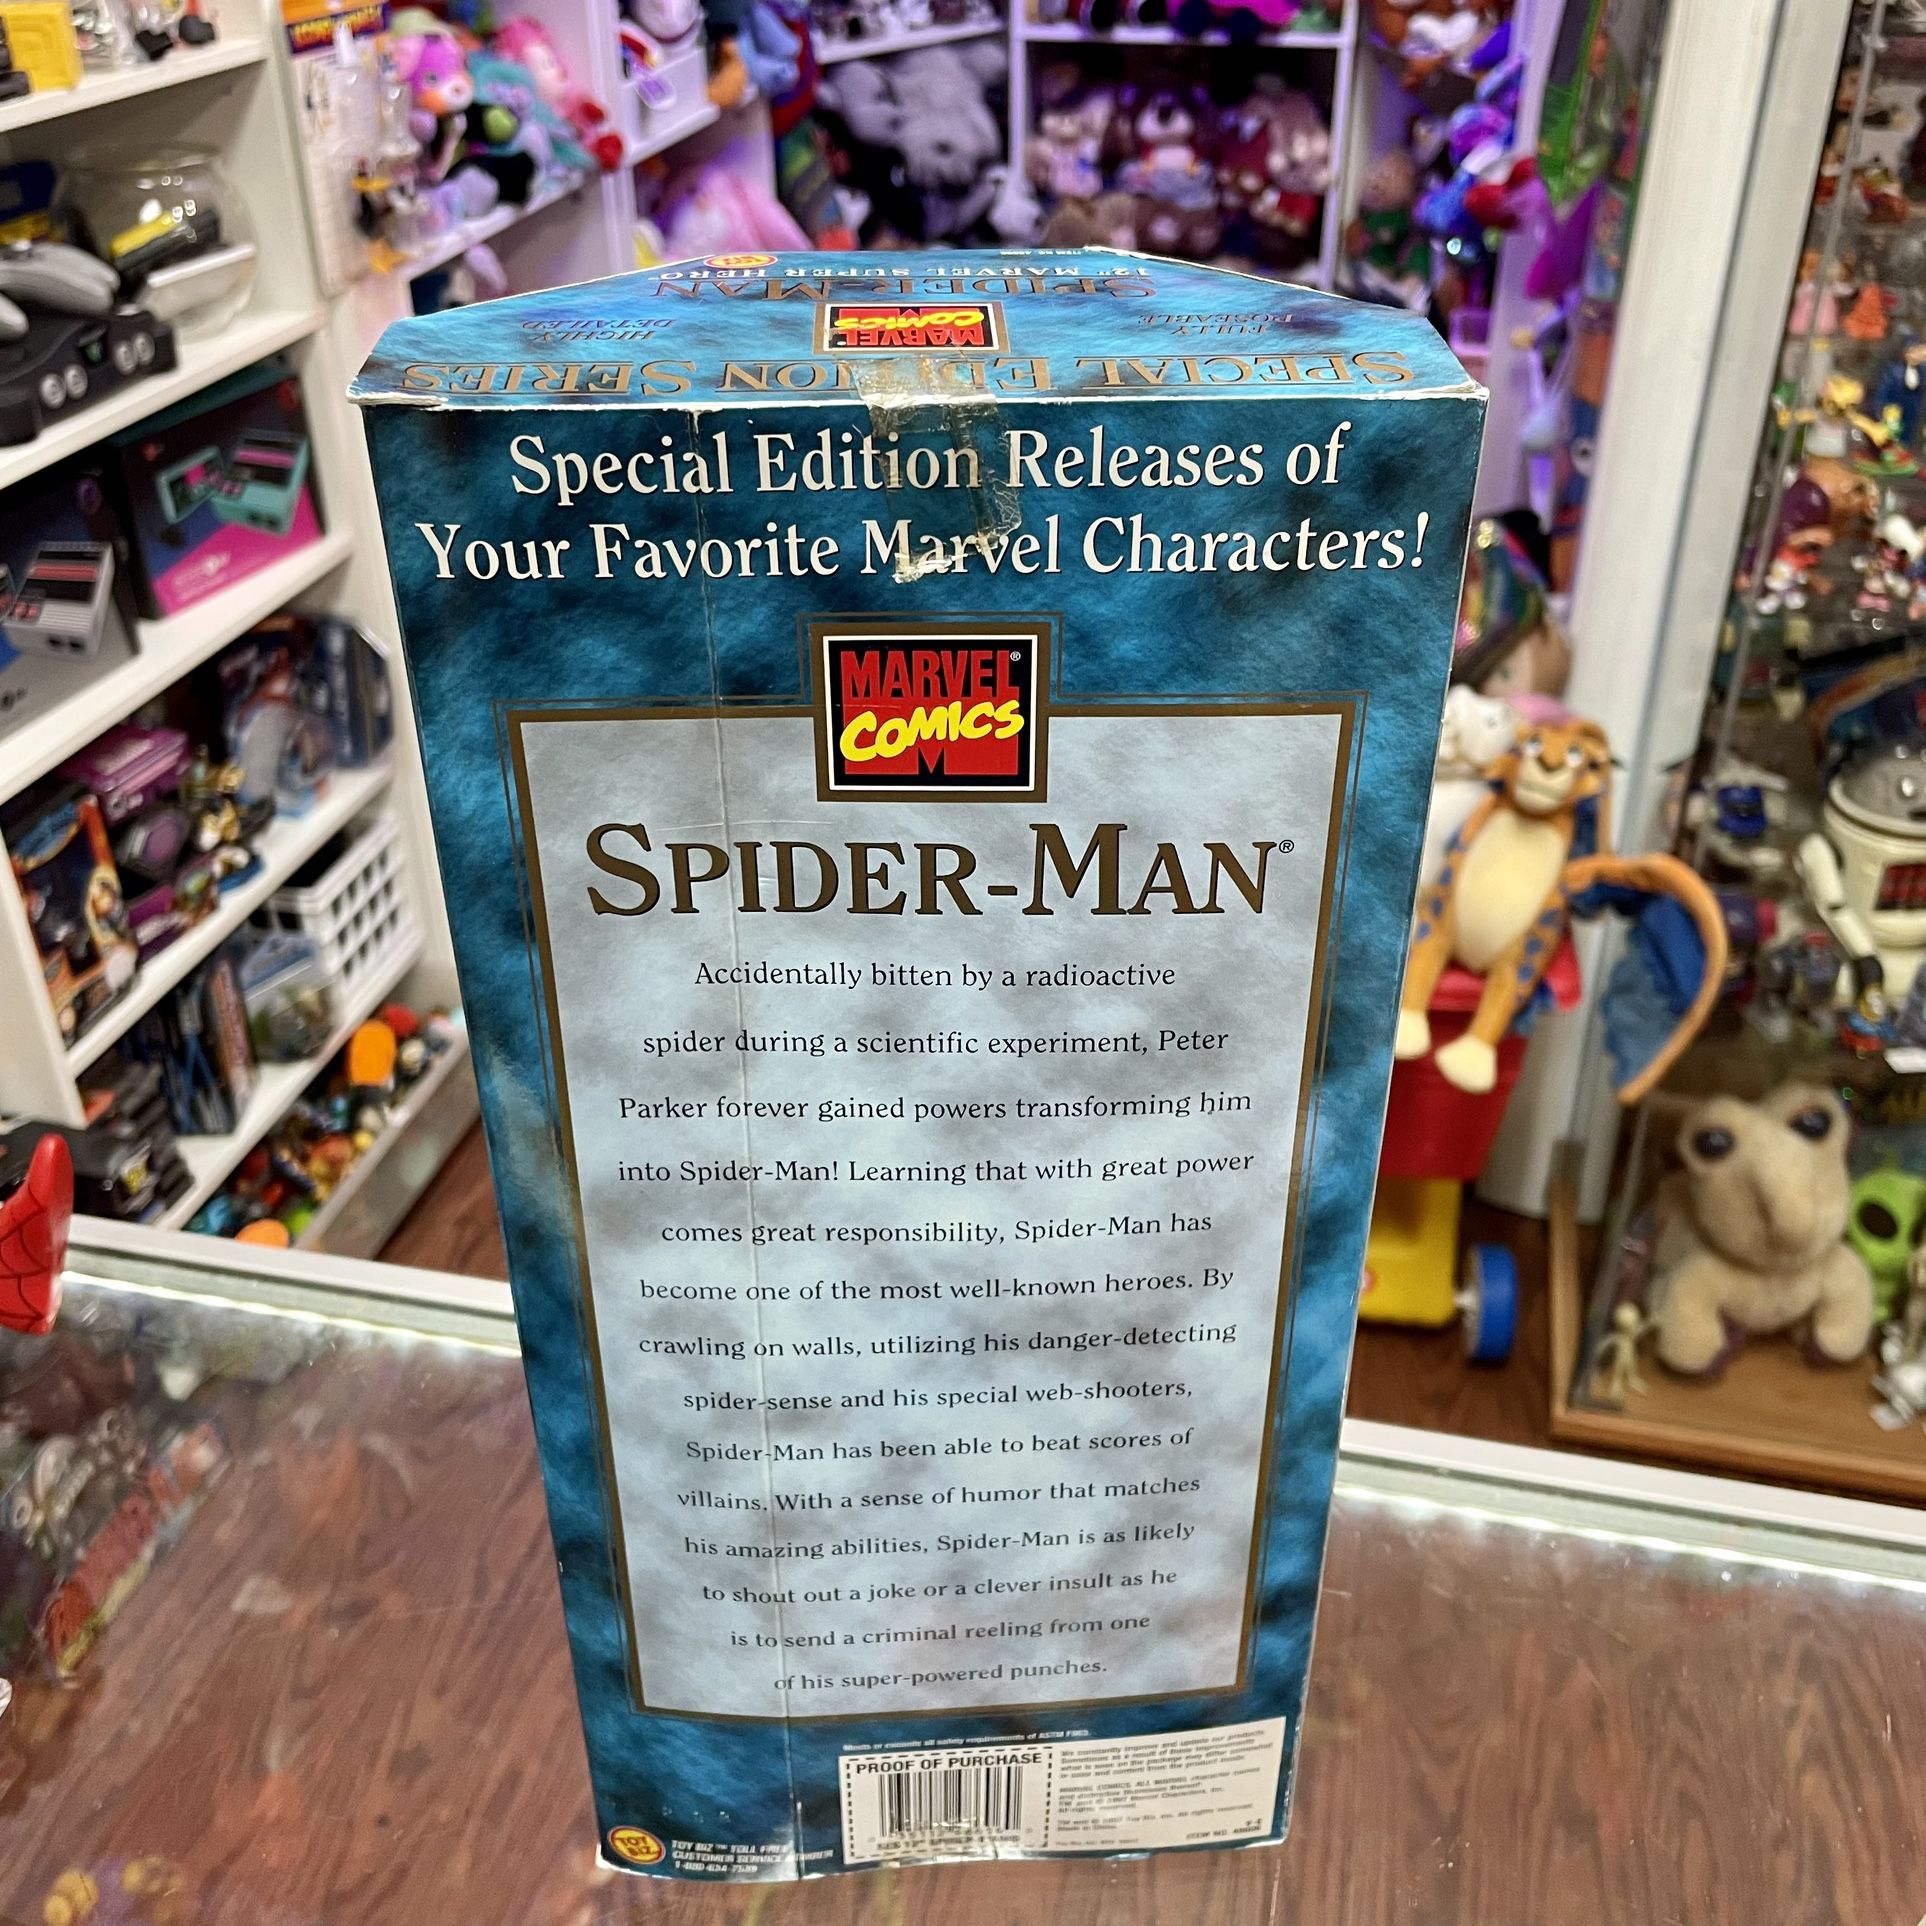 Vintage 1997 Toy Biz Special Edition Series Spider-Man 12” Marvel Super Hero Action Figure Toy NIB - Highly Detailed, Cloth Clothes